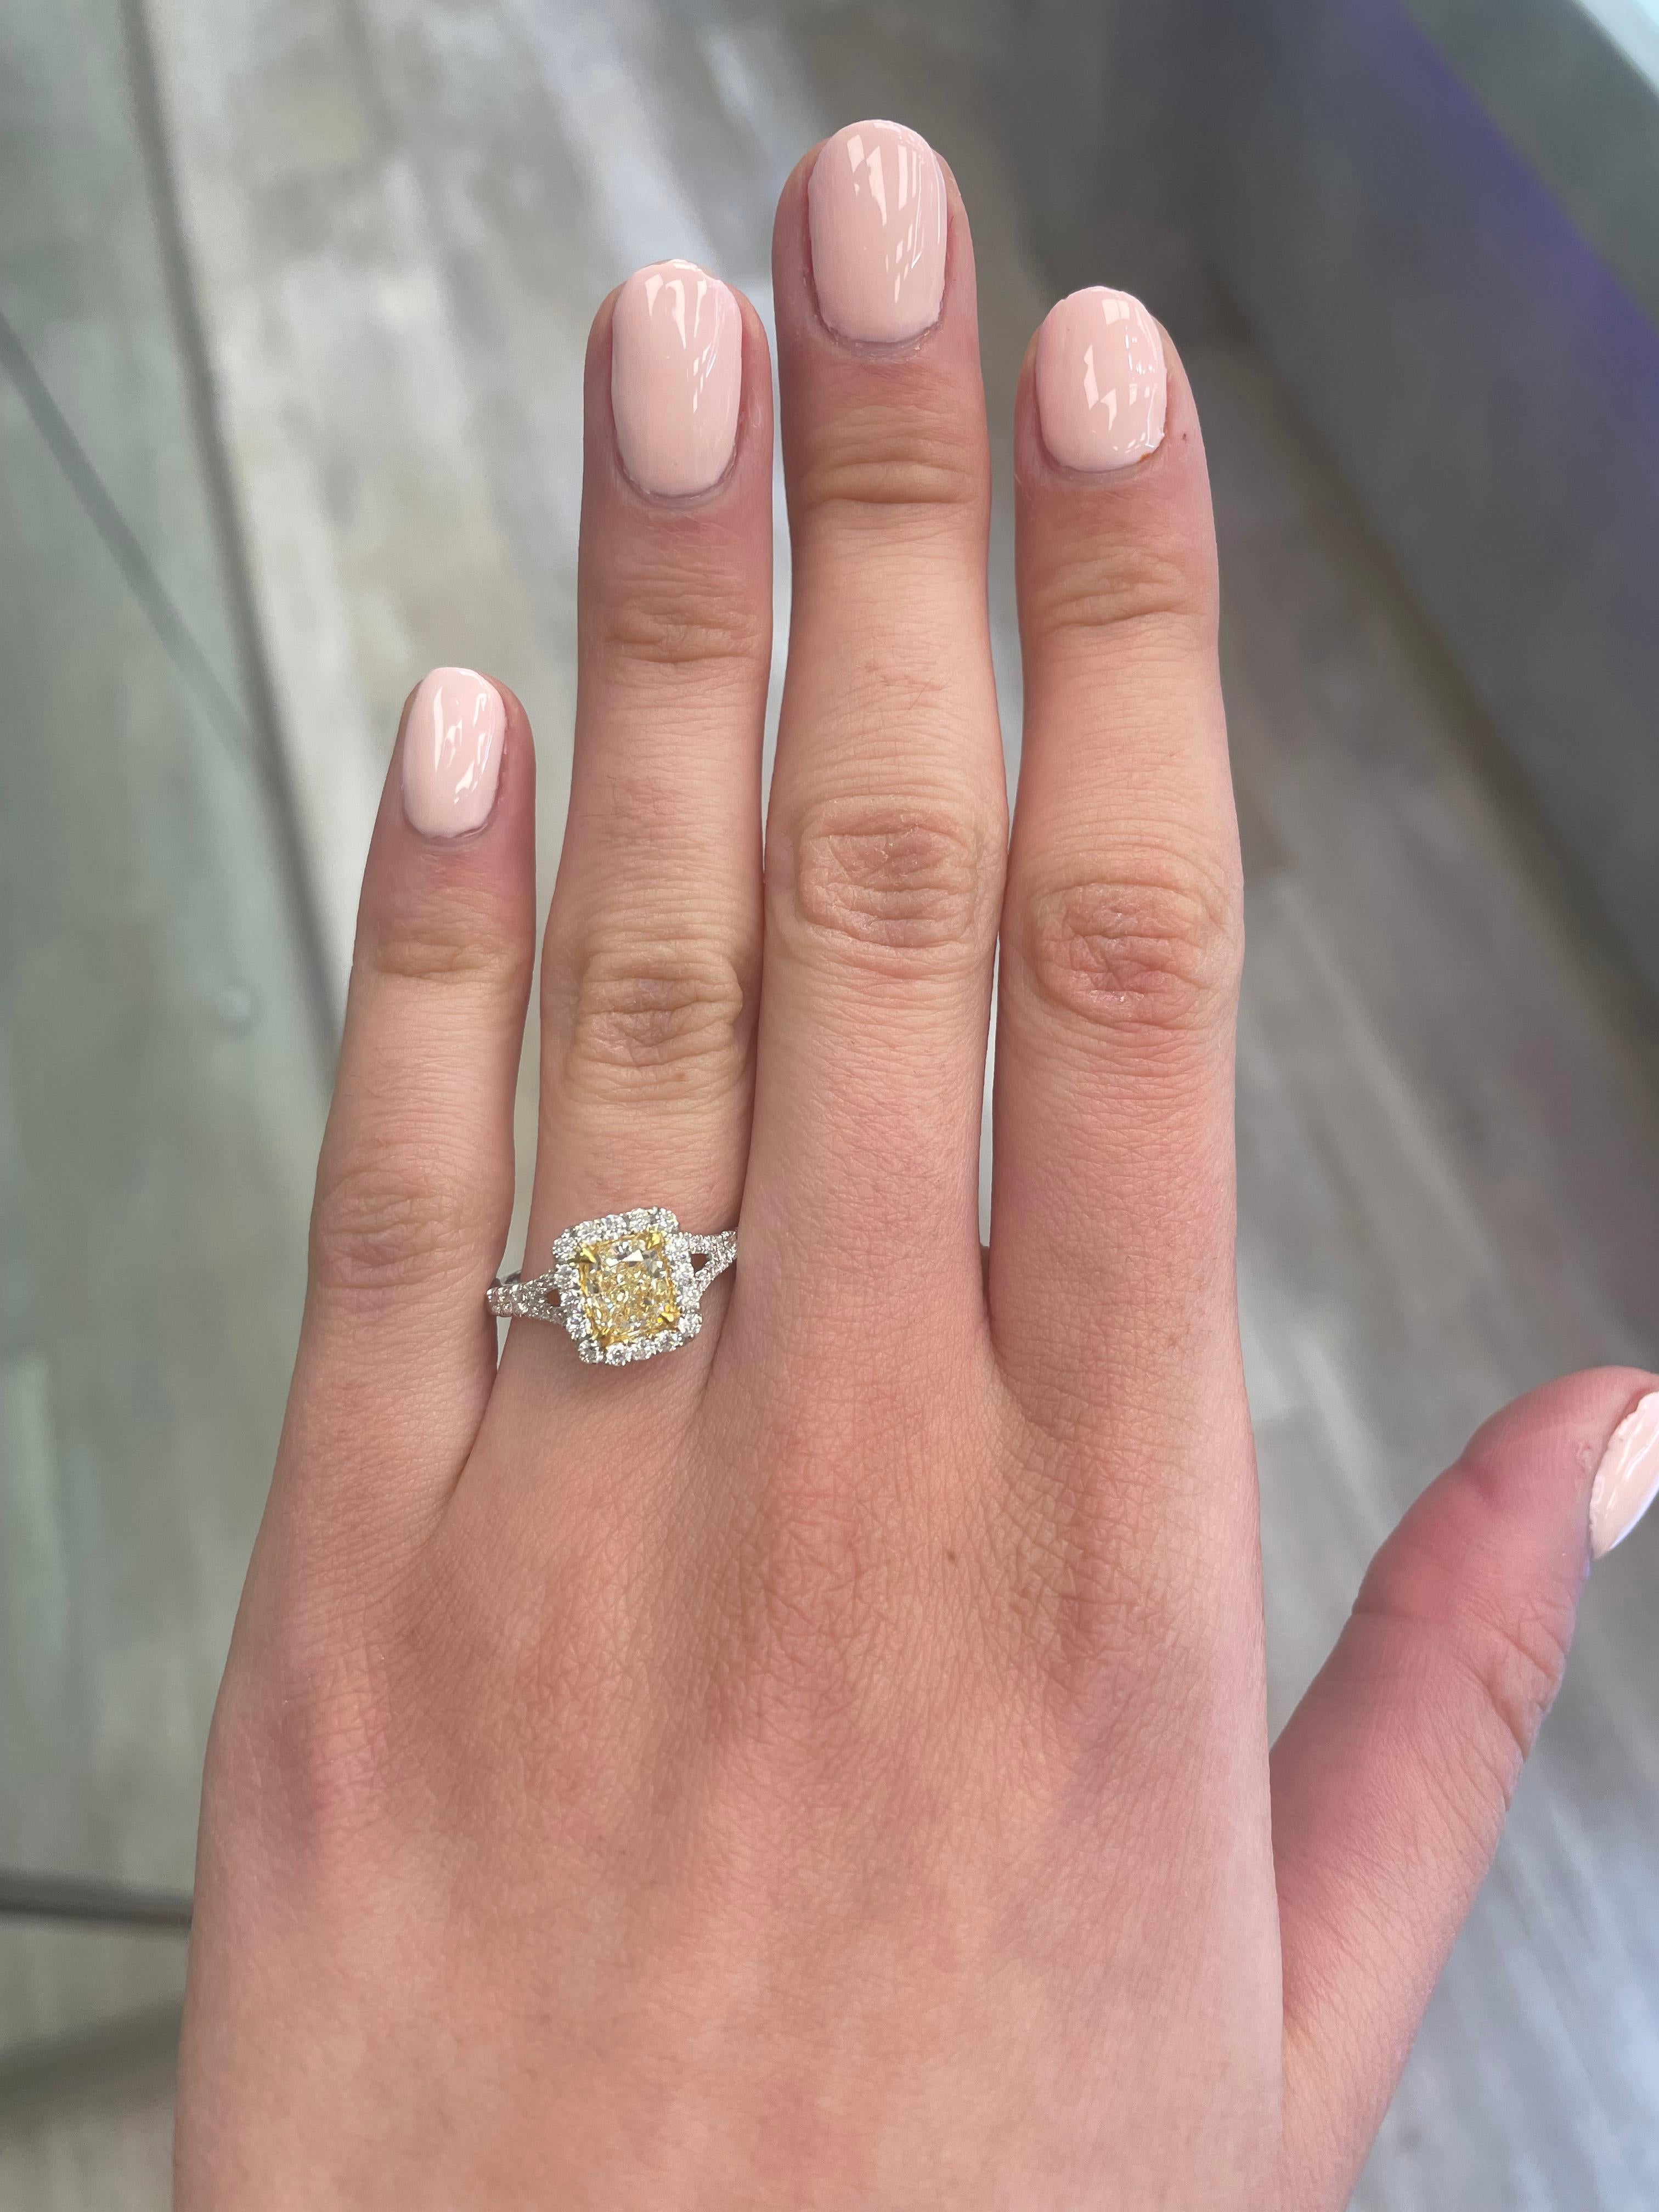 Stunning modern EGL certified yellow diamond with halo ring, two-tone 18k yellow and white gold, split shank. By Alexander Beverly Hills
1.52 carats total diamond weight.
1.02 carat cushion cut Fancy Light Yellow color and VS1 clarity diamond, EGL